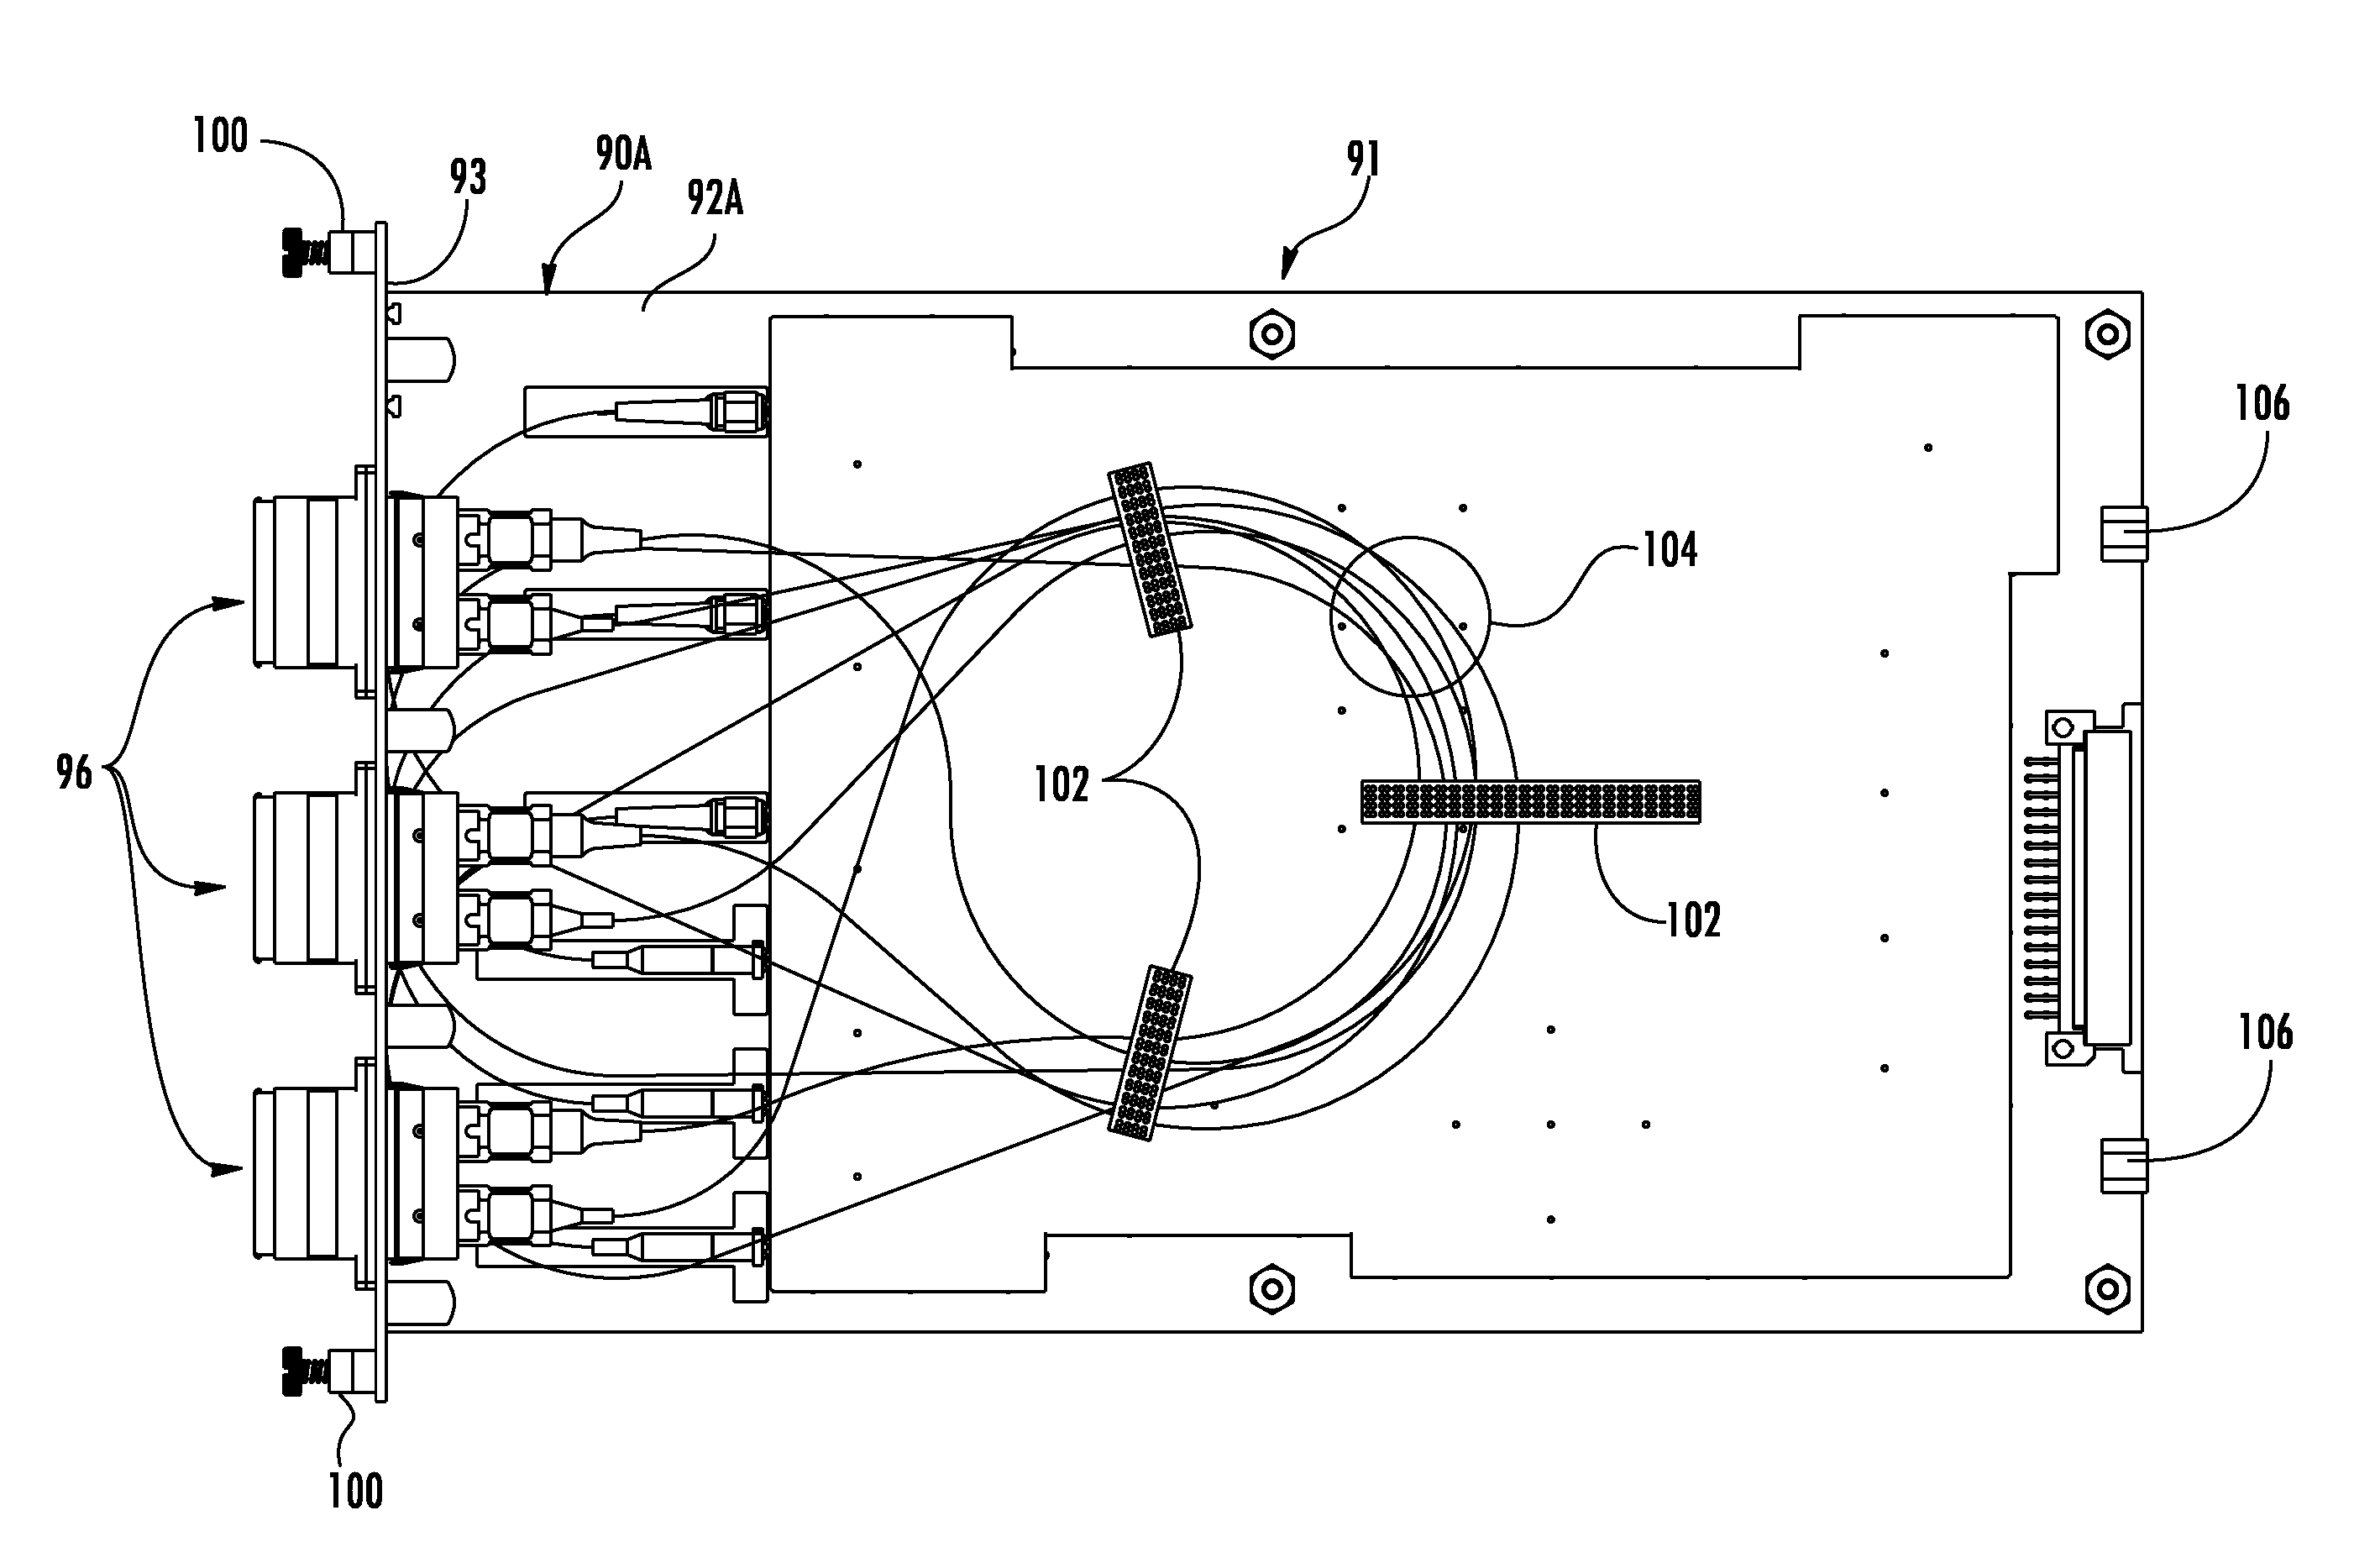 Mounting devices for optical devices, and related sub-assemblies, apparatuses, and methods